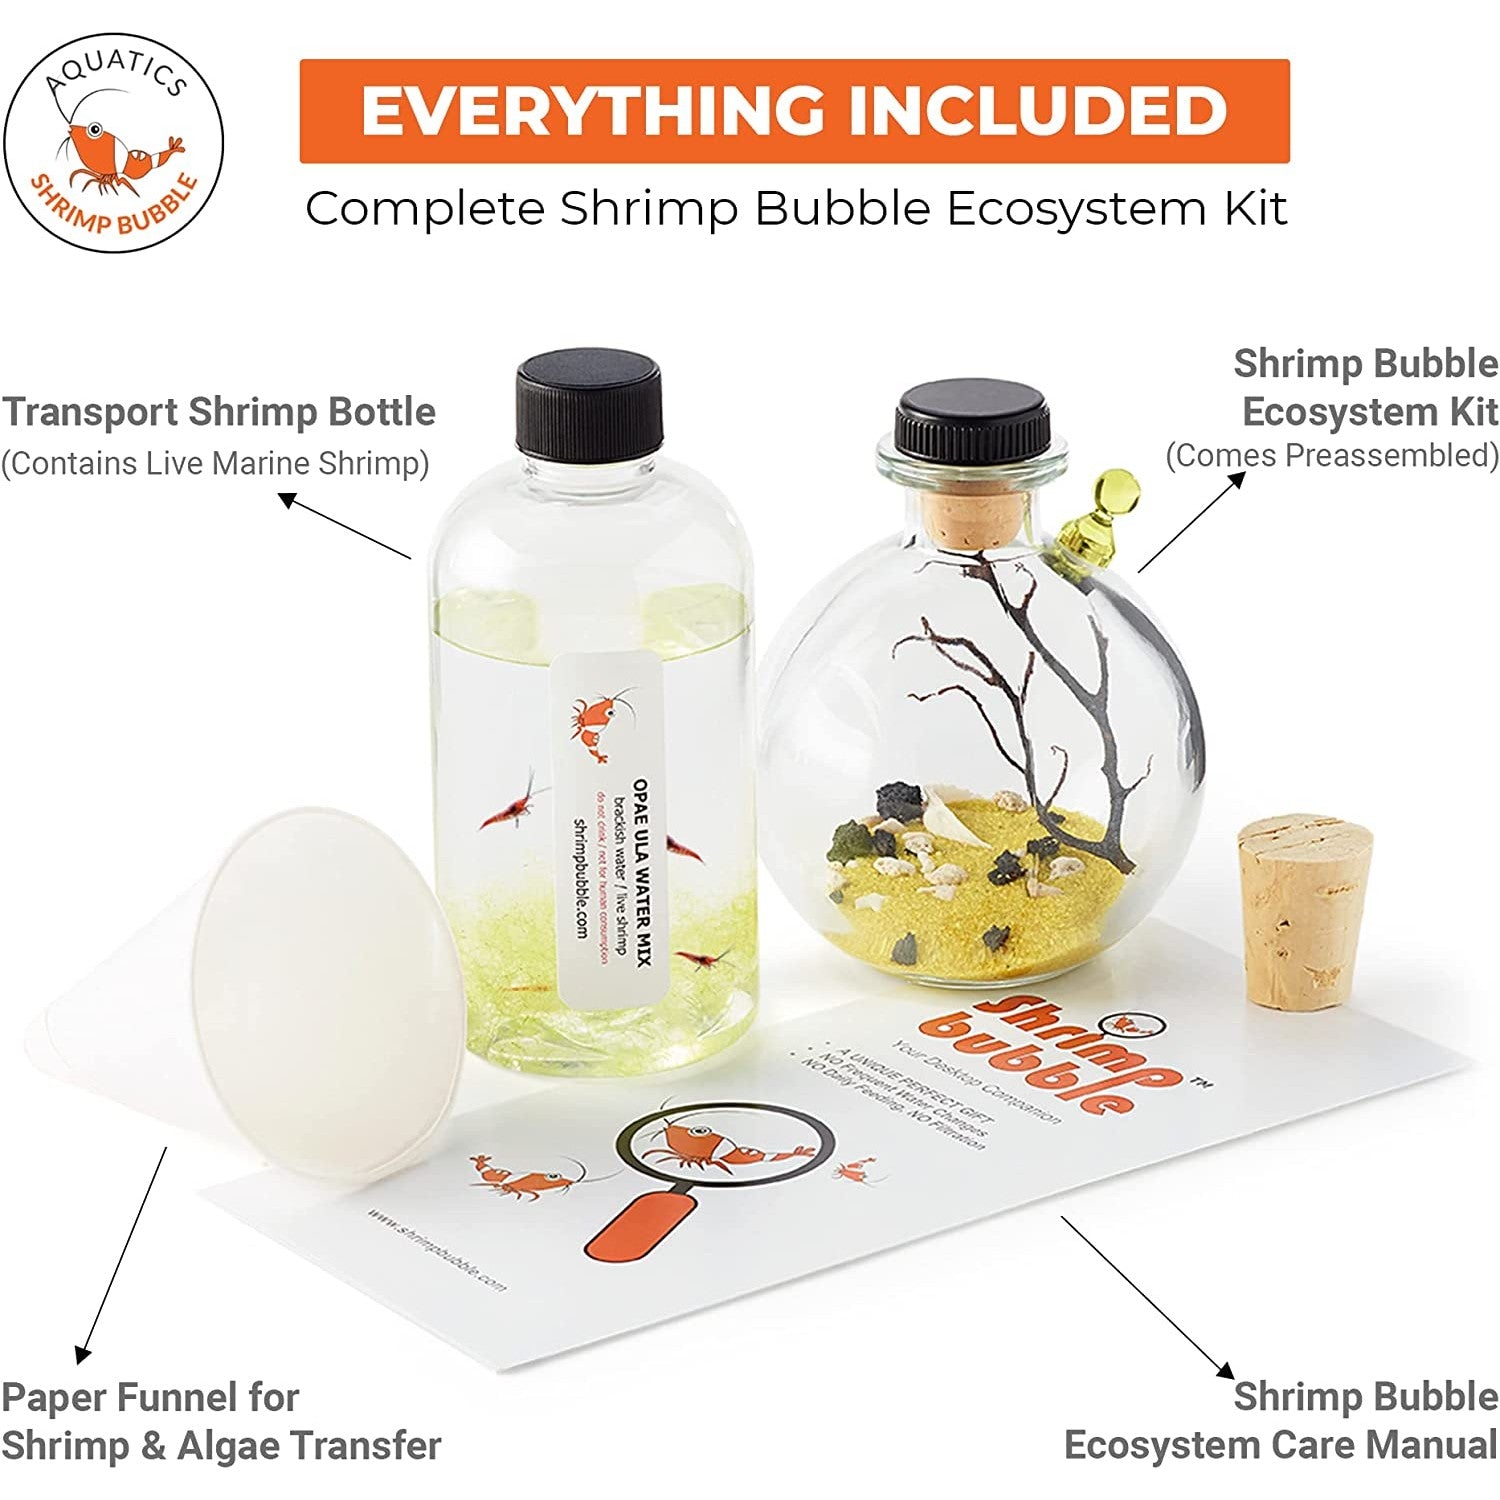 A shrimp bubble kit. There is text which says, 'Everything included. Complete shrimp bubble ecosystem kit.'